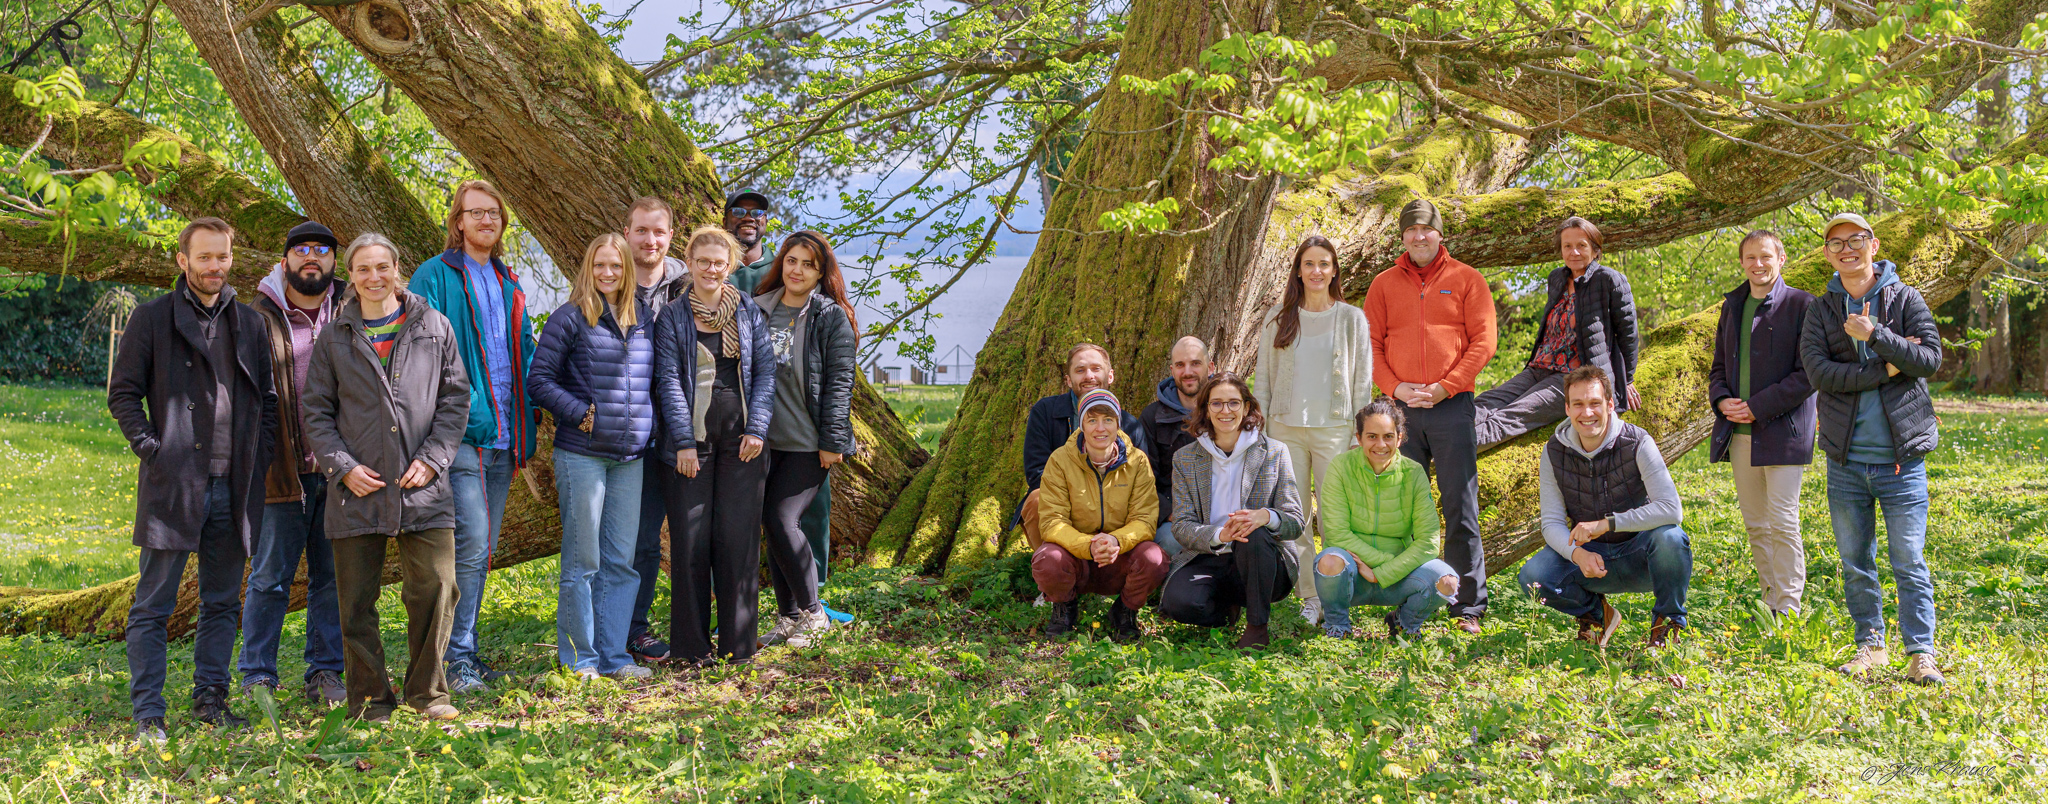 LEMG working group in front of a tree.